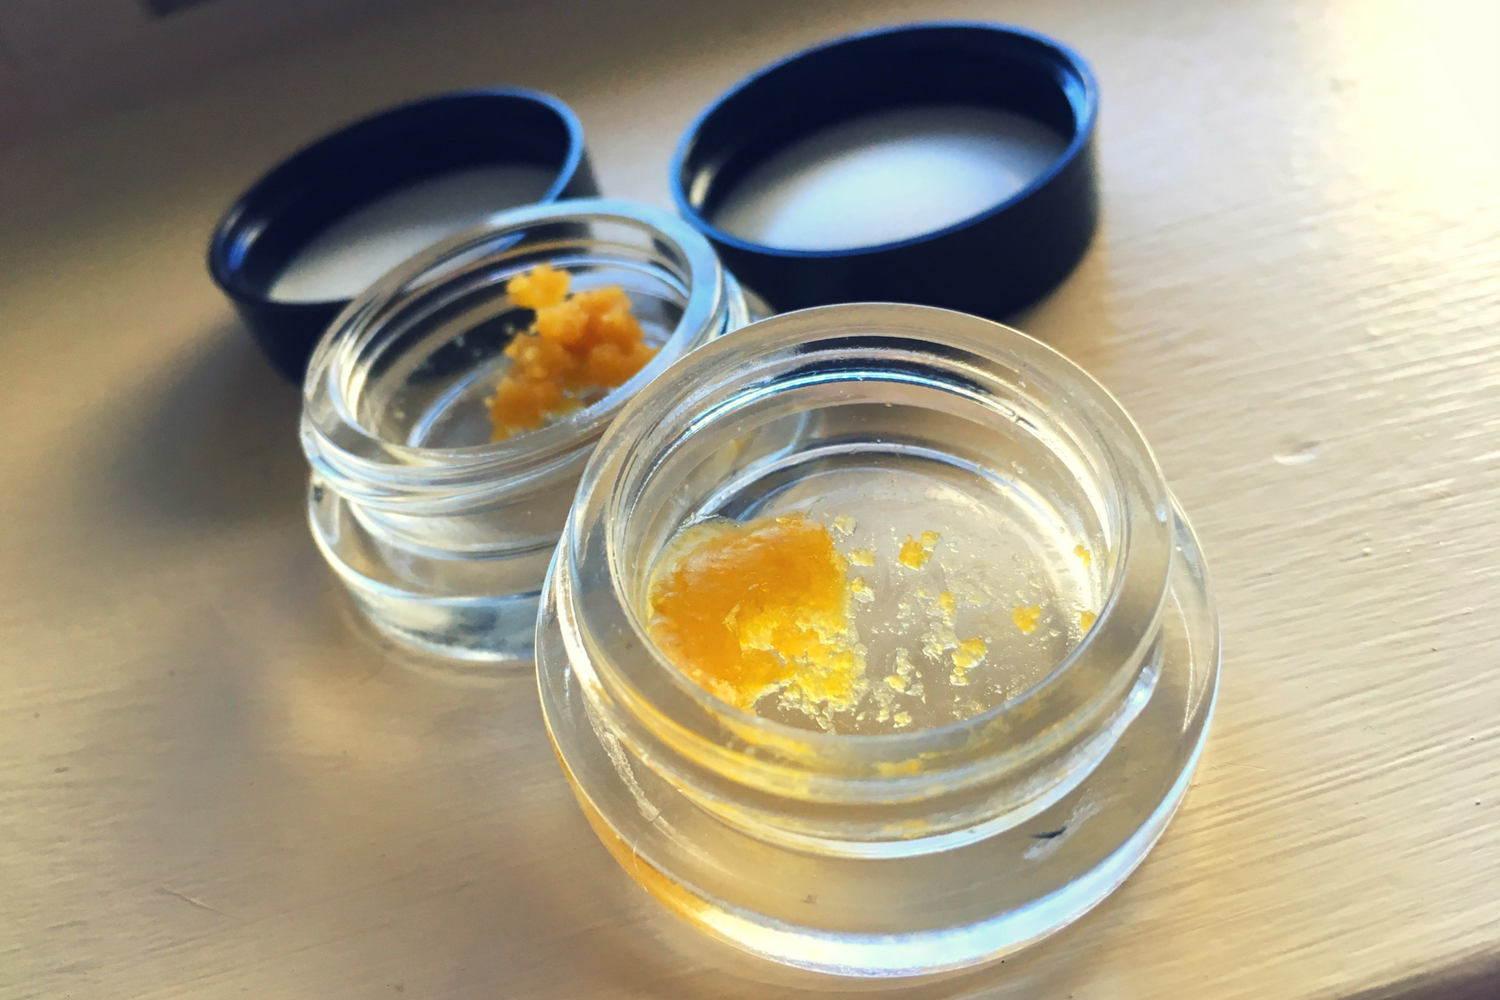 Are Cannabis Concentrates Becoming More Popular than Flower? | PotGuide.com